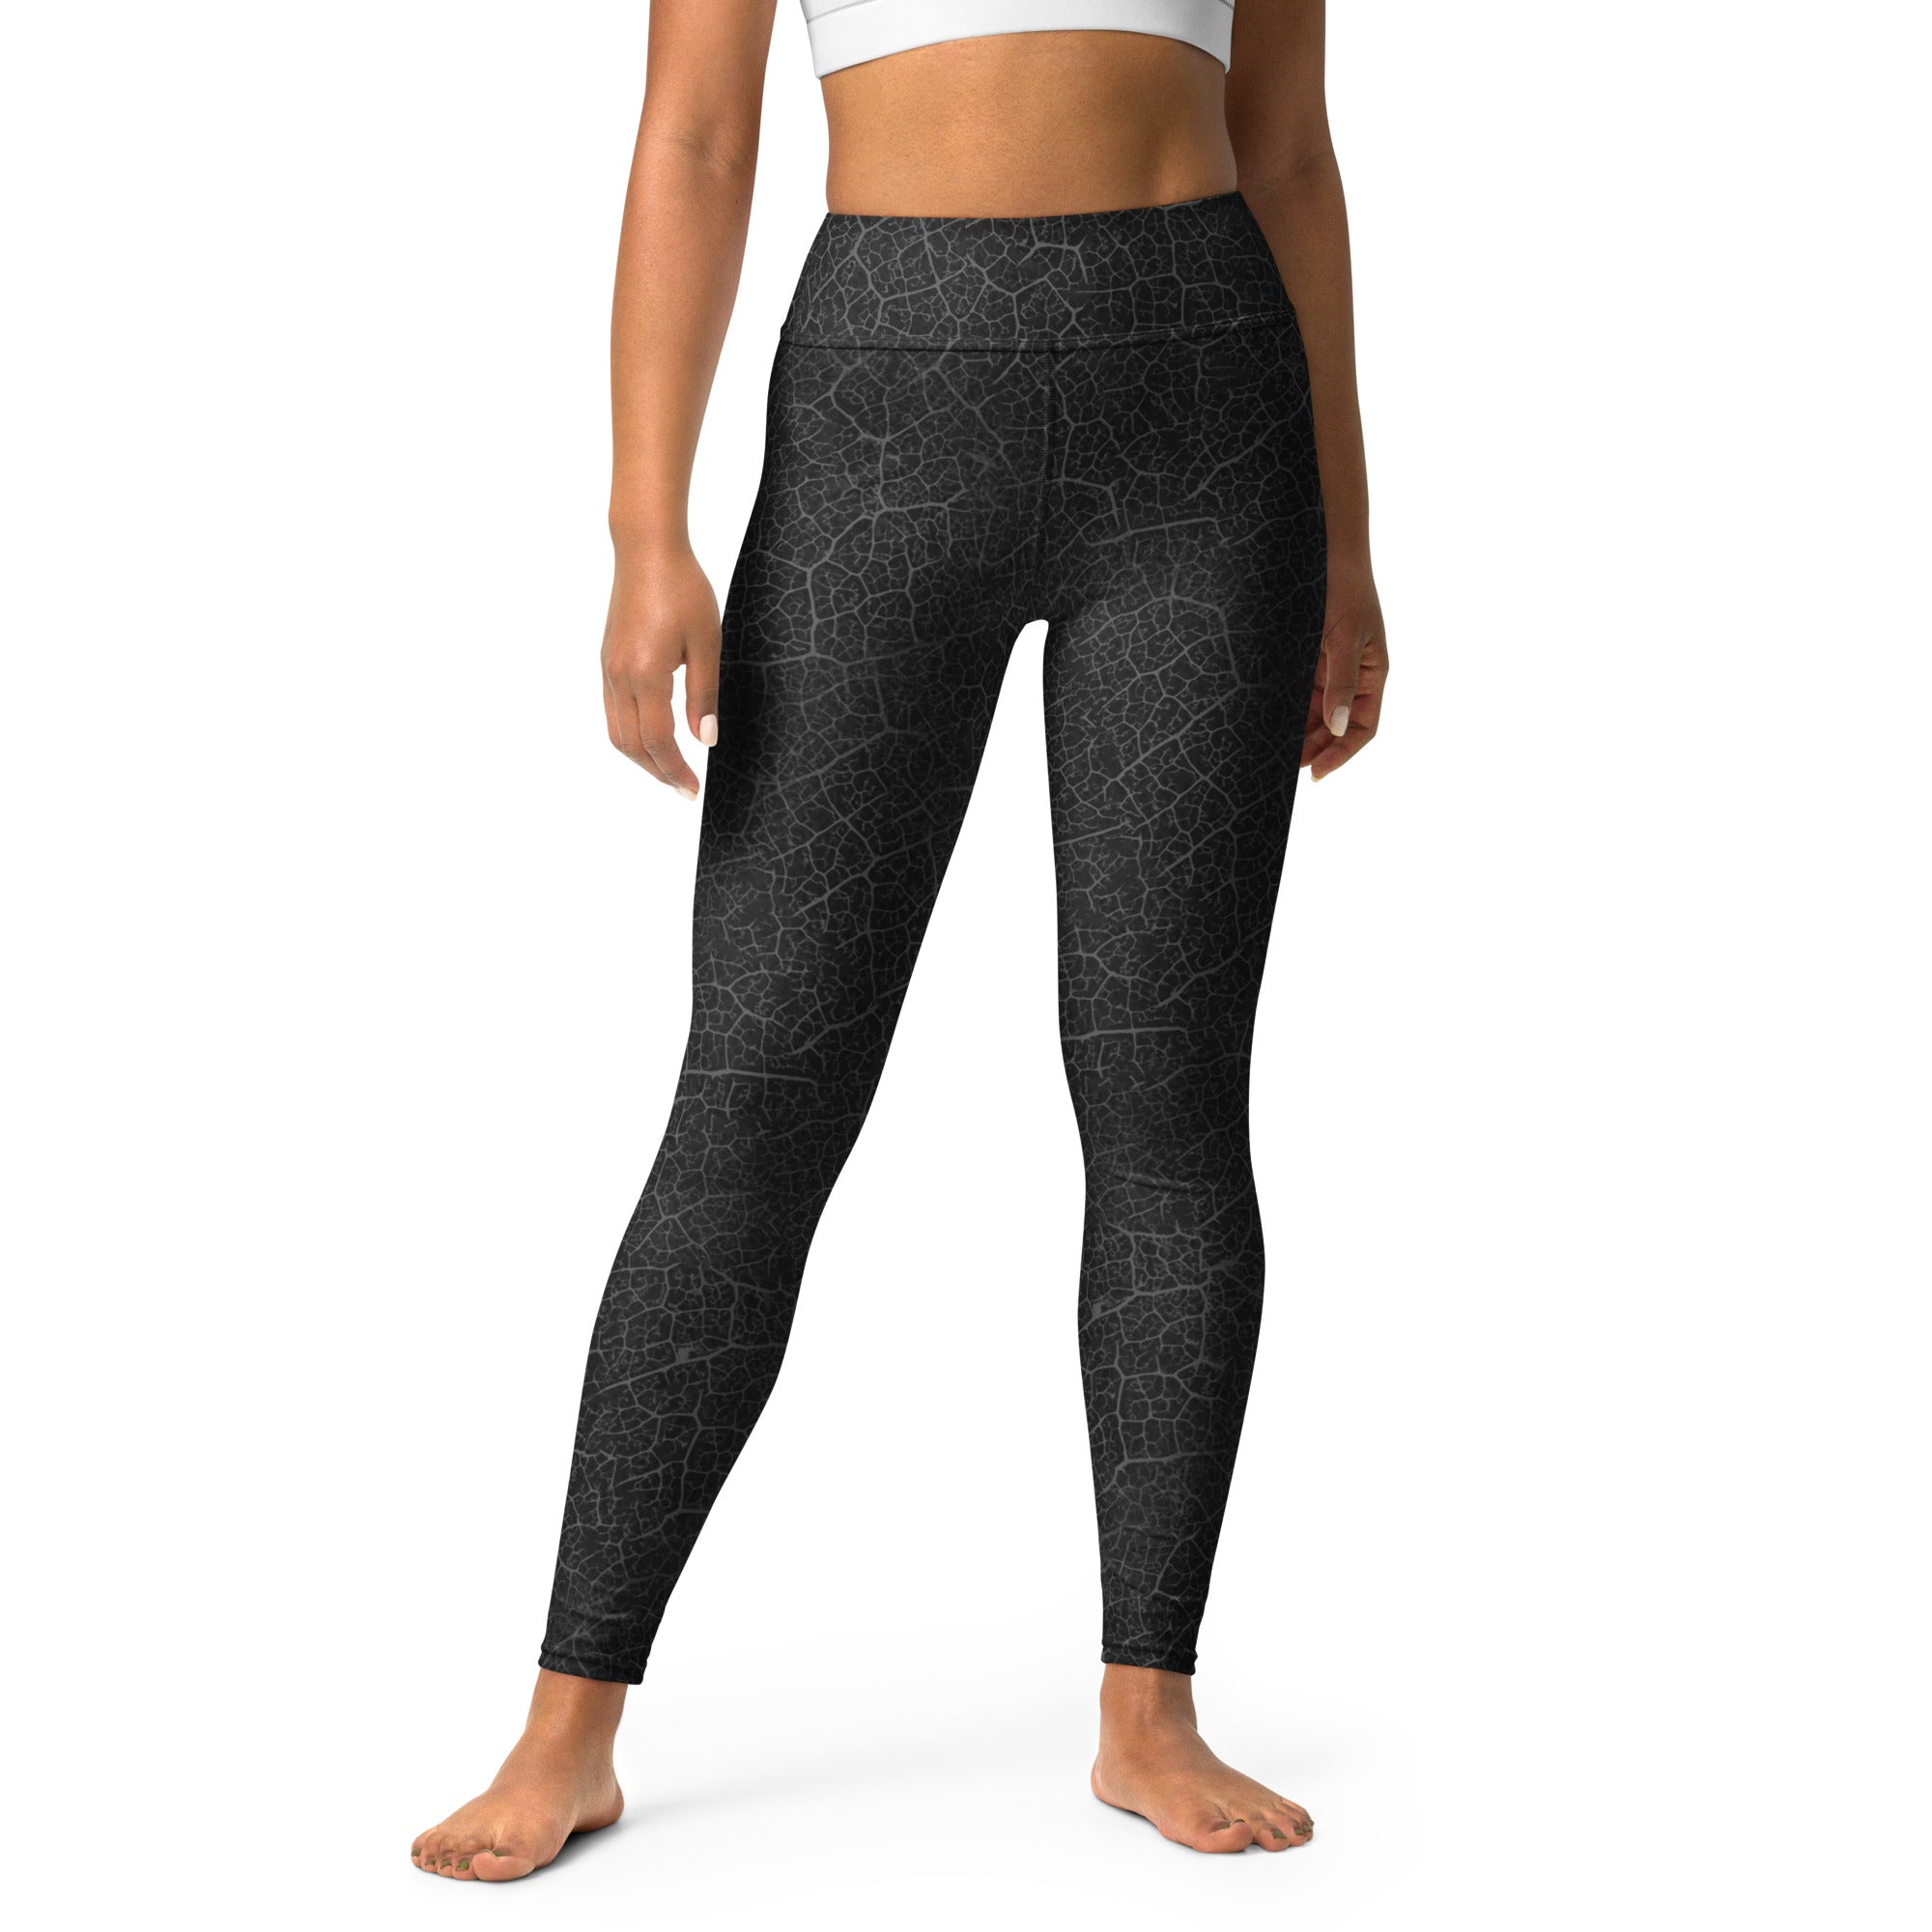 Practicing yoga in Serene Leaf Texture Yoga Leggings, showcasing their nature-inspired design and superior stretch.